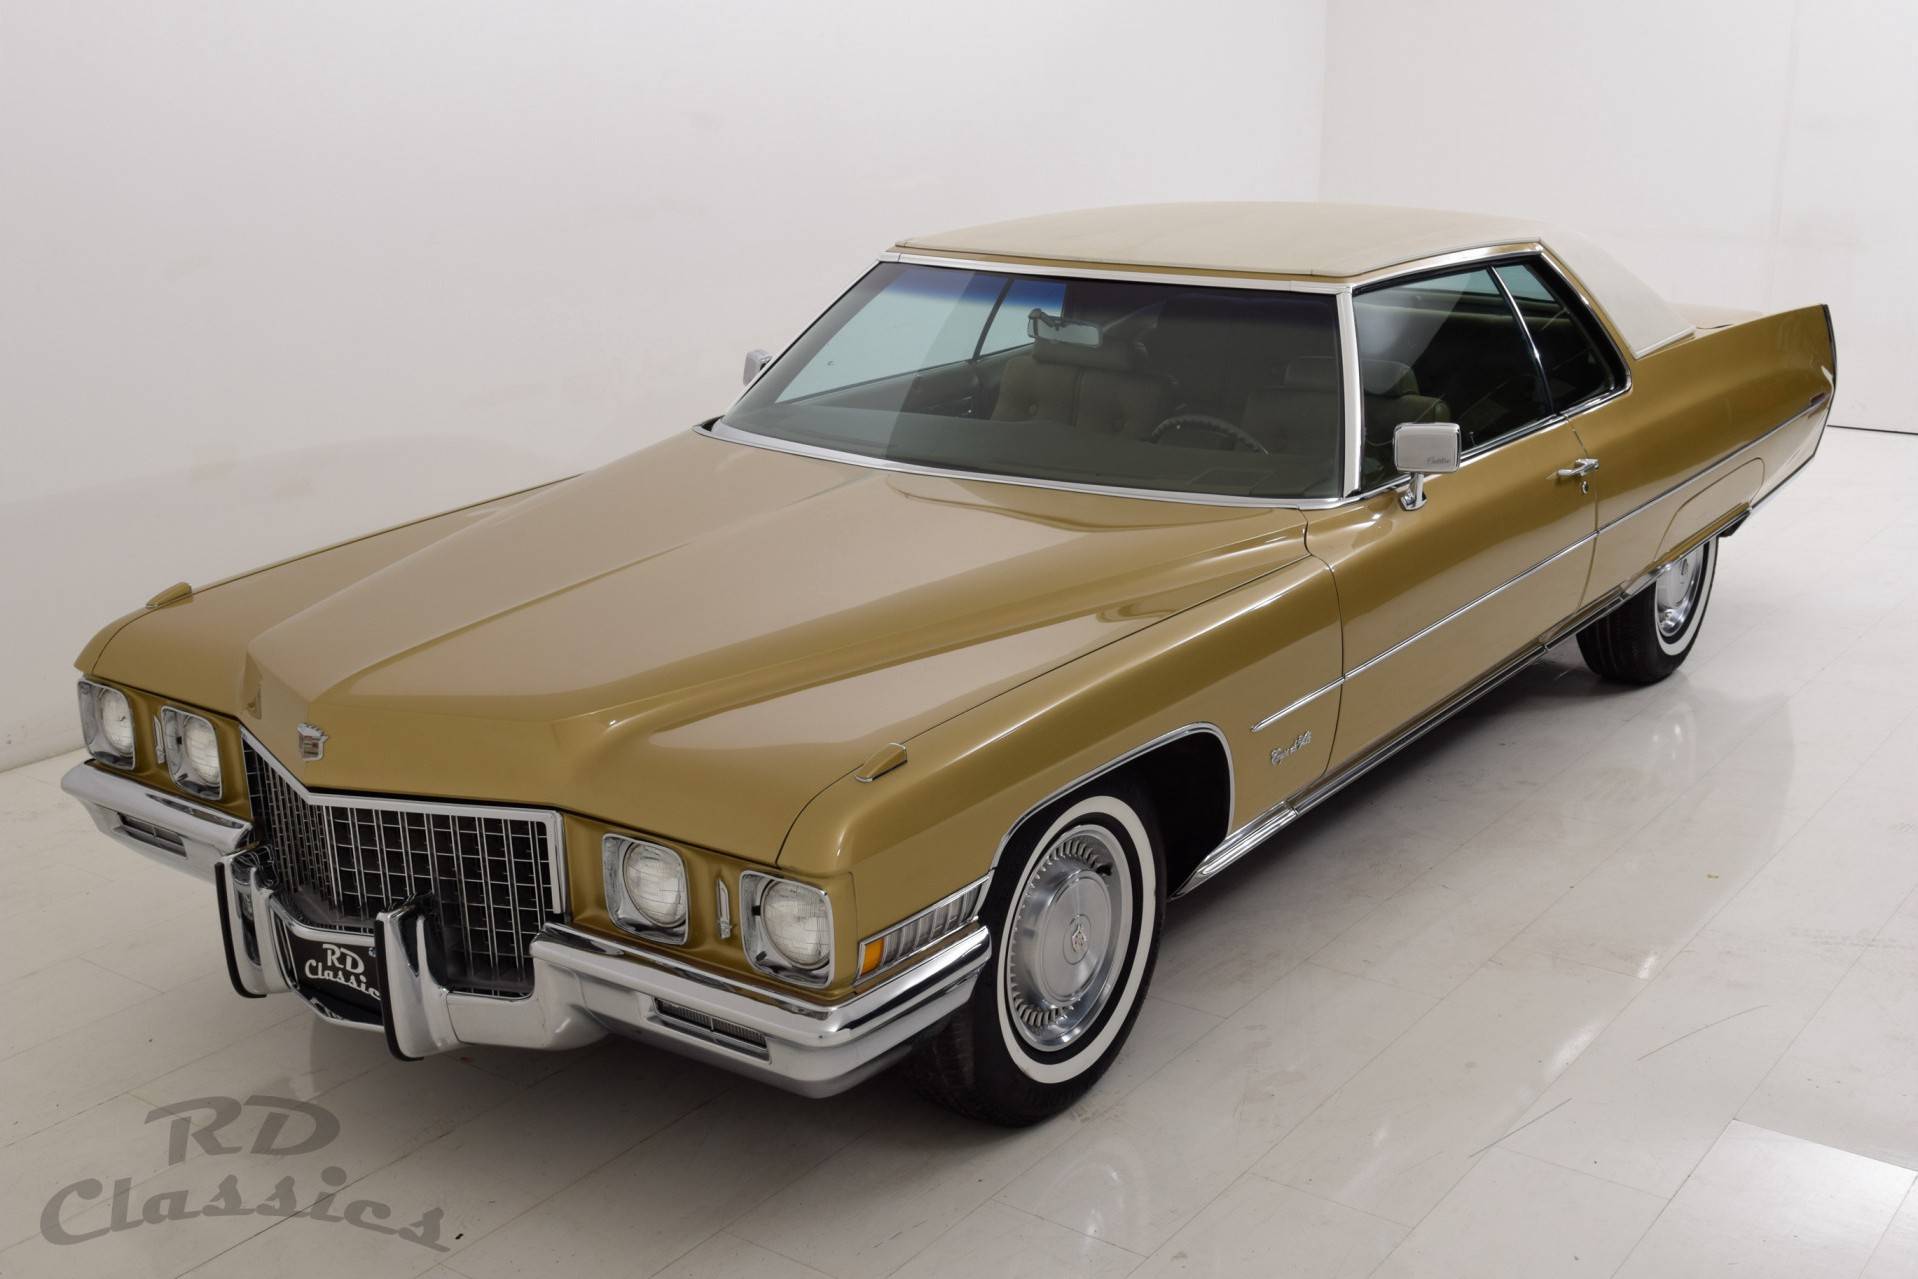 For Sale Cadillac Coupe DeVille 1971 offered for AUD 56801